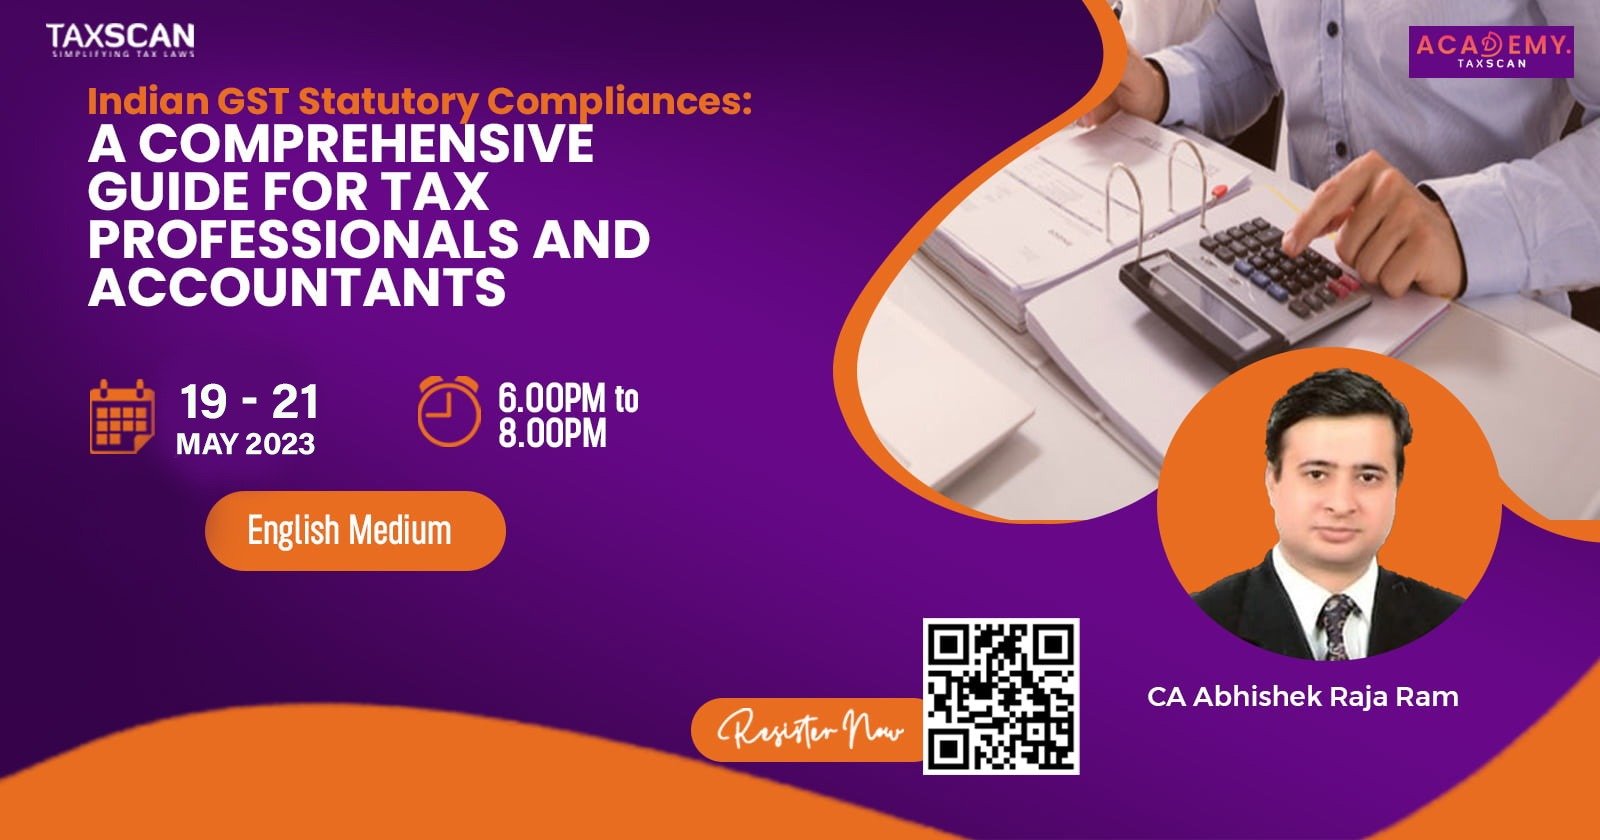 Indian GST Statutory Compliances - Indian GST - GST - GST Statutory Compliances - Comprehensive Guide - Tax Professionals and Accountants - Tax Professionals - Accountants - Certificate Course -taxscan